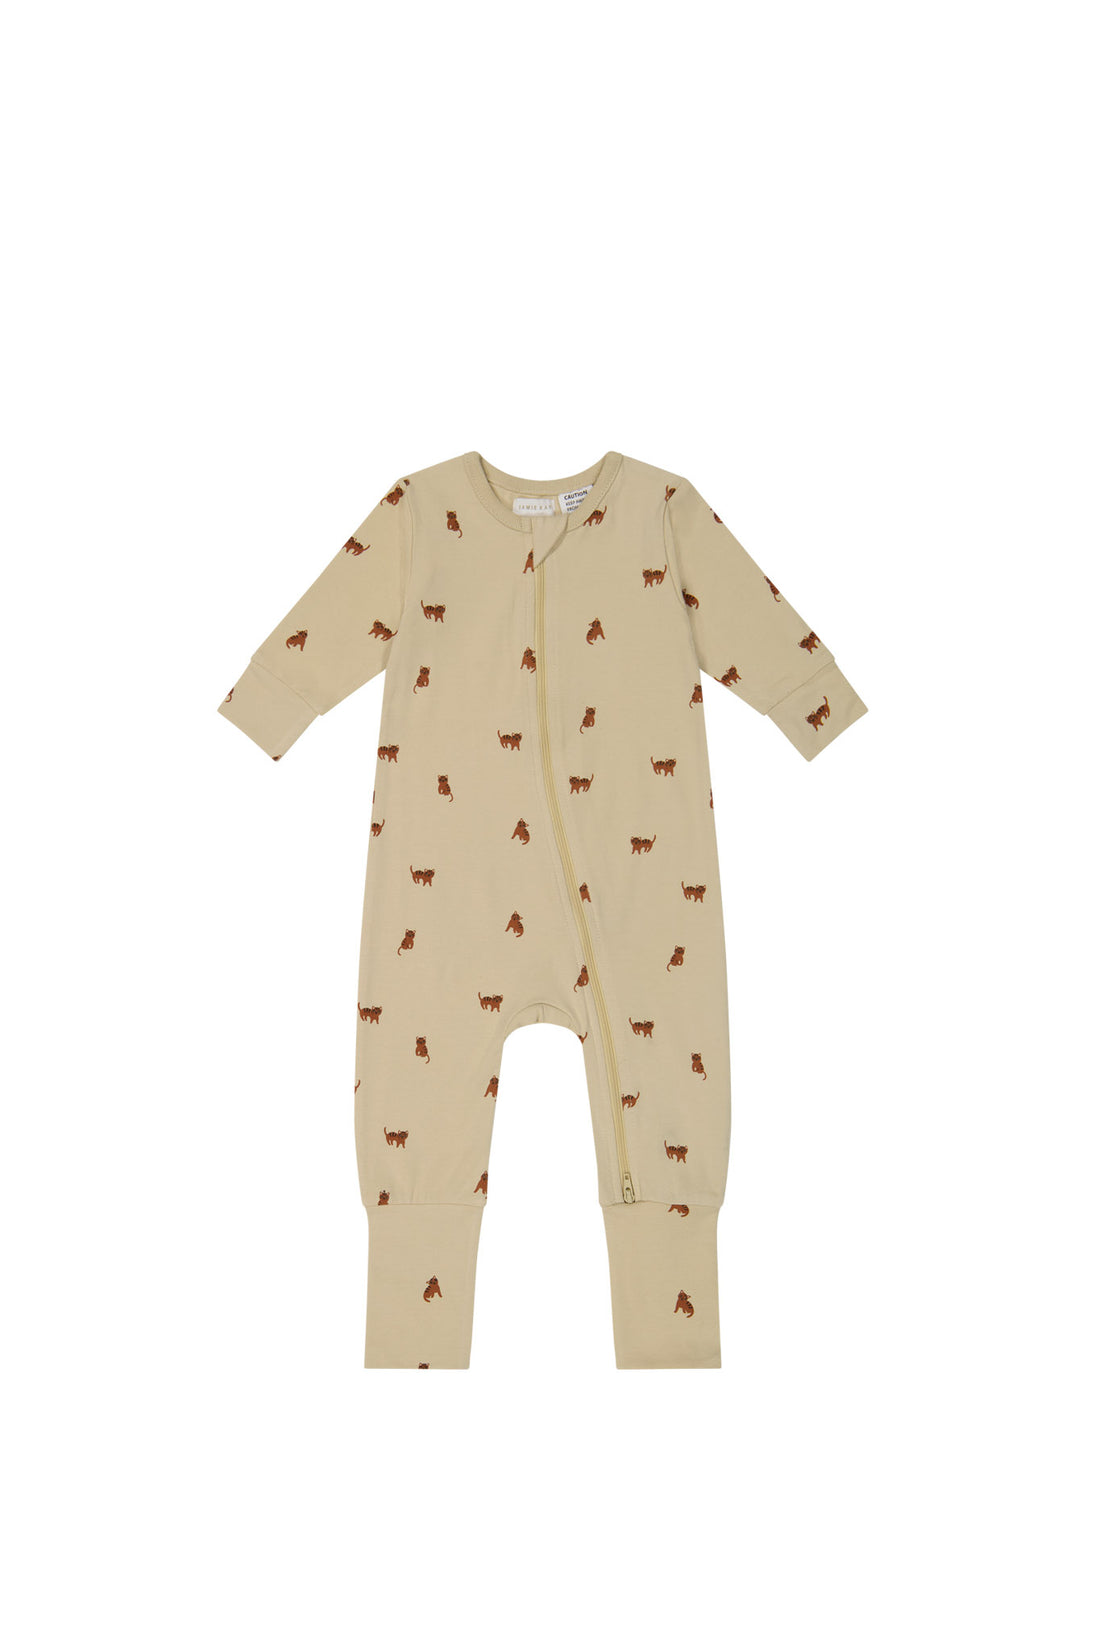 Organic Cotton Reese Zip Onepiece - Tommy Tigers Childrens Onepiece from Jamie Kay NZ